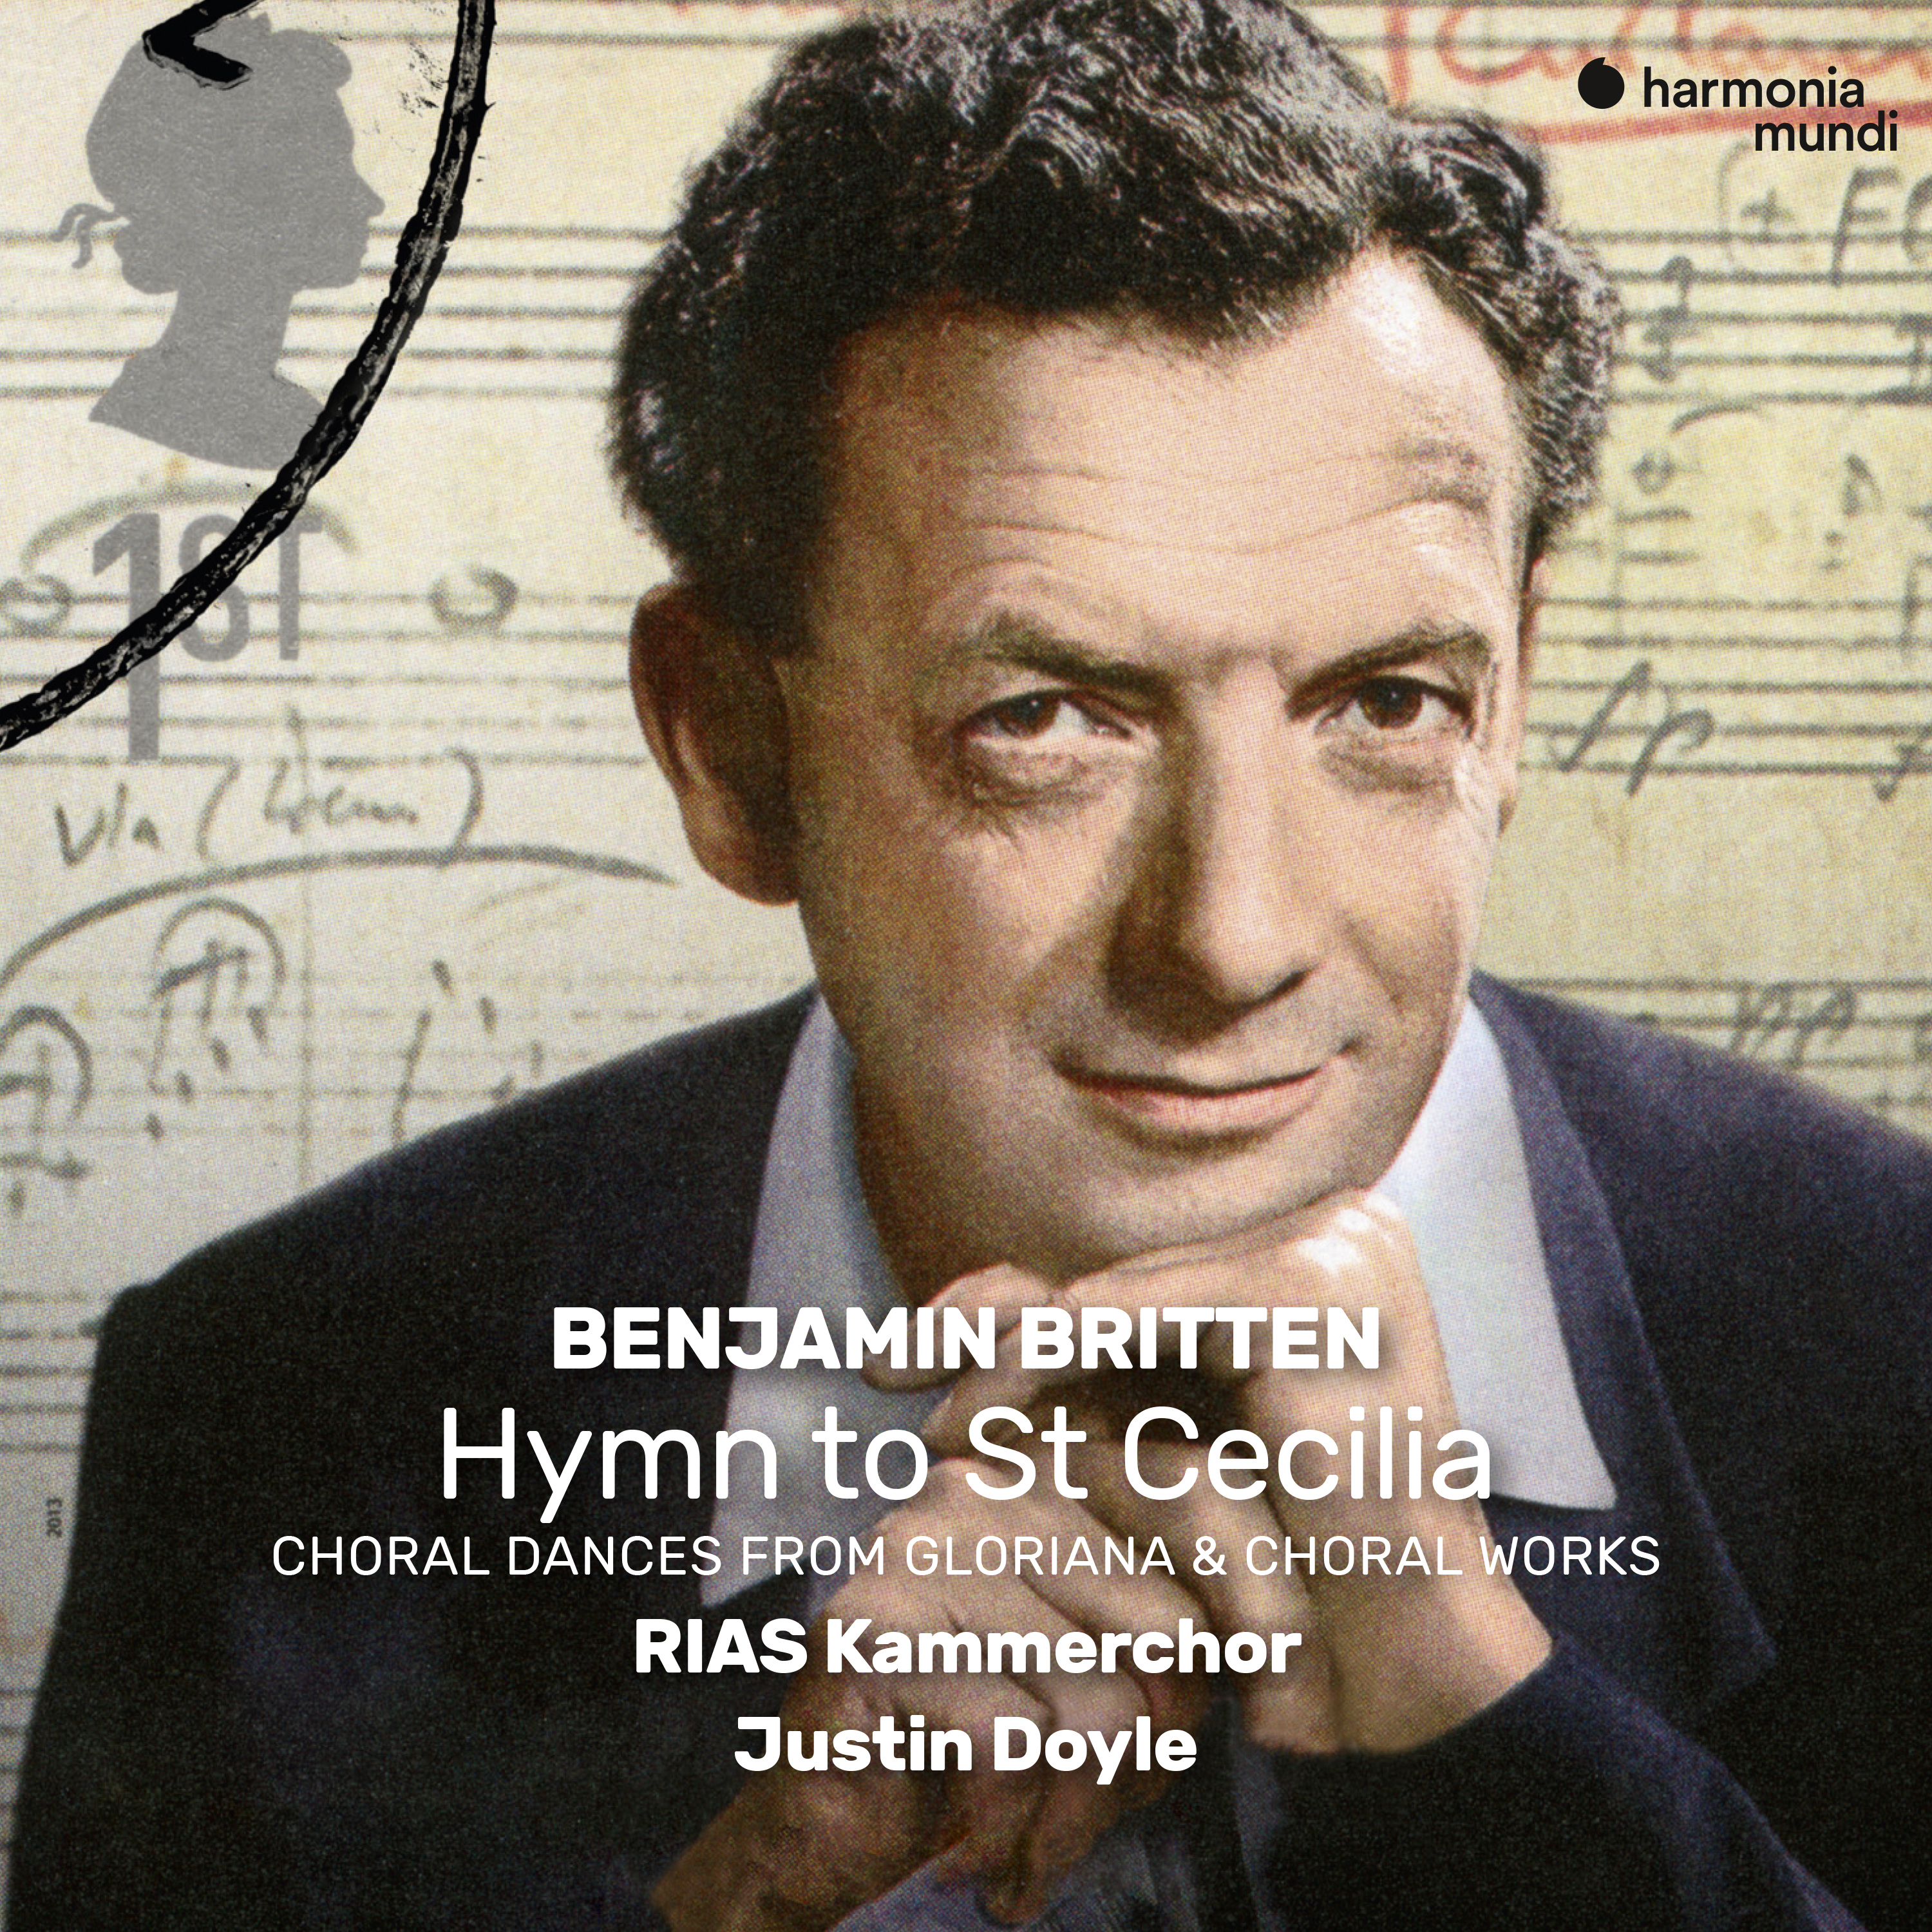 Hymn to St Cecilia, Op. 27